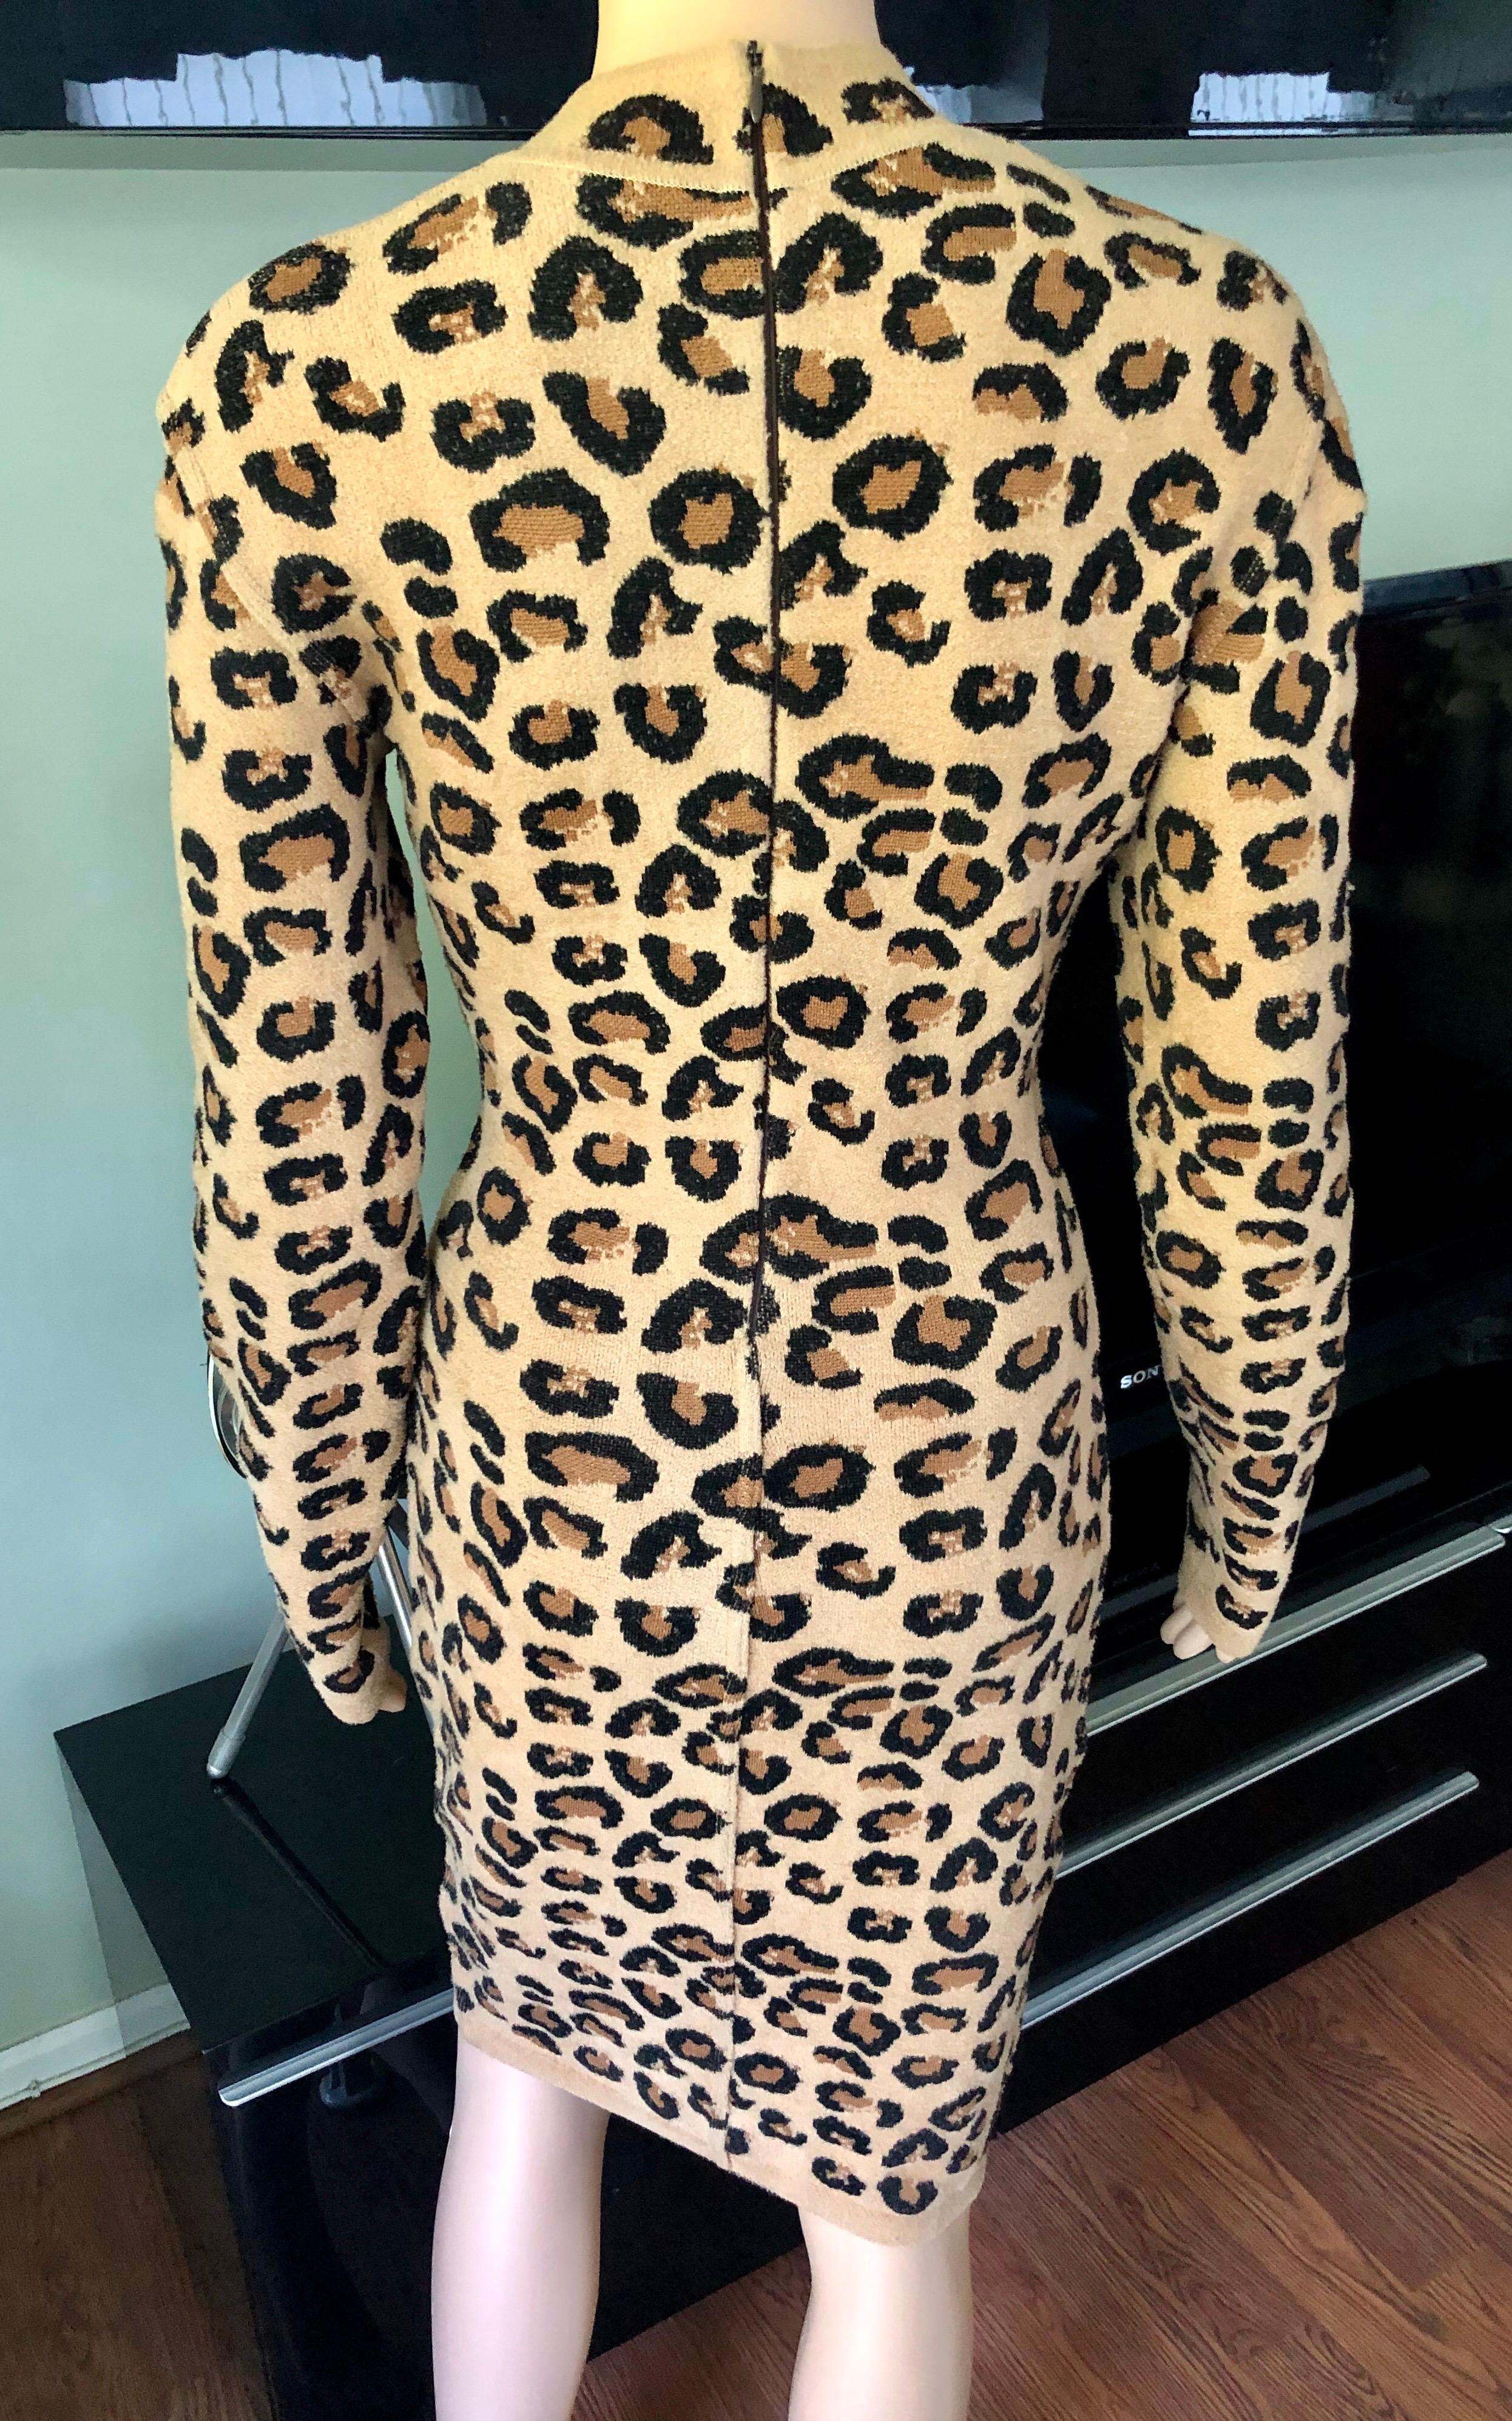 Azzedine Alaia F/W 1991 Runway Vintage Iconic Leopard Print Bodycon Dress In Good Condition For Sale In Naples, FL